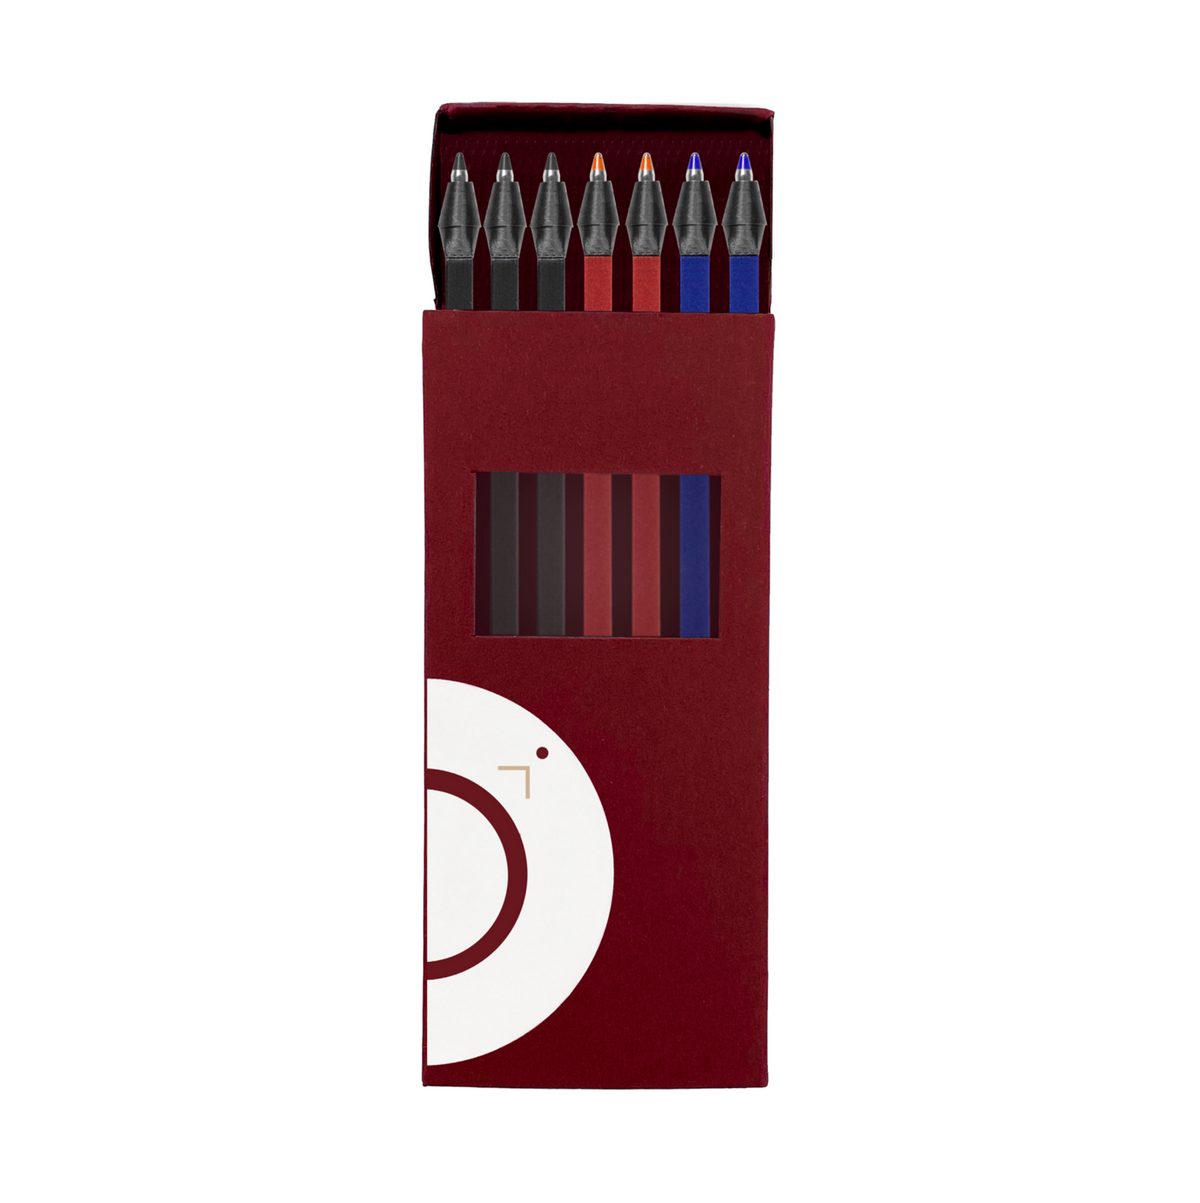 AMEICO - Official US Distributor of Perpetua - Recycled Graphite Pencils